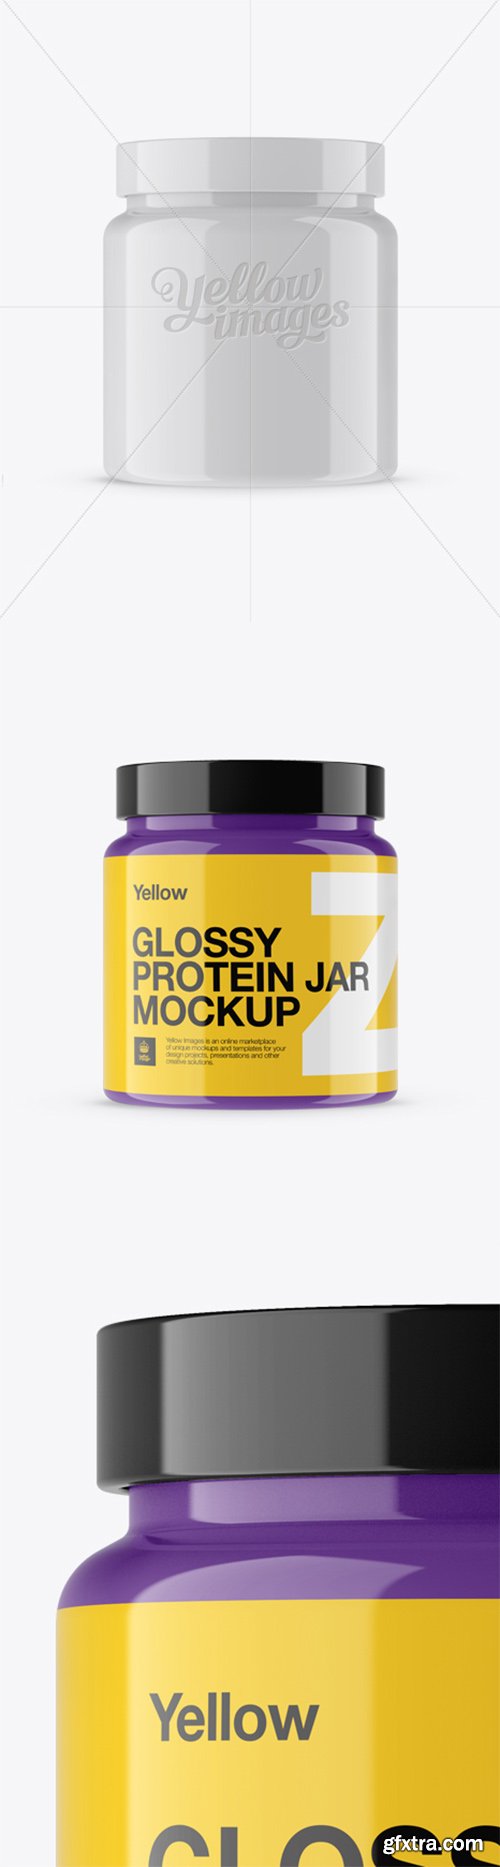 Glossy Protein Jar Mockup - Front View 13770